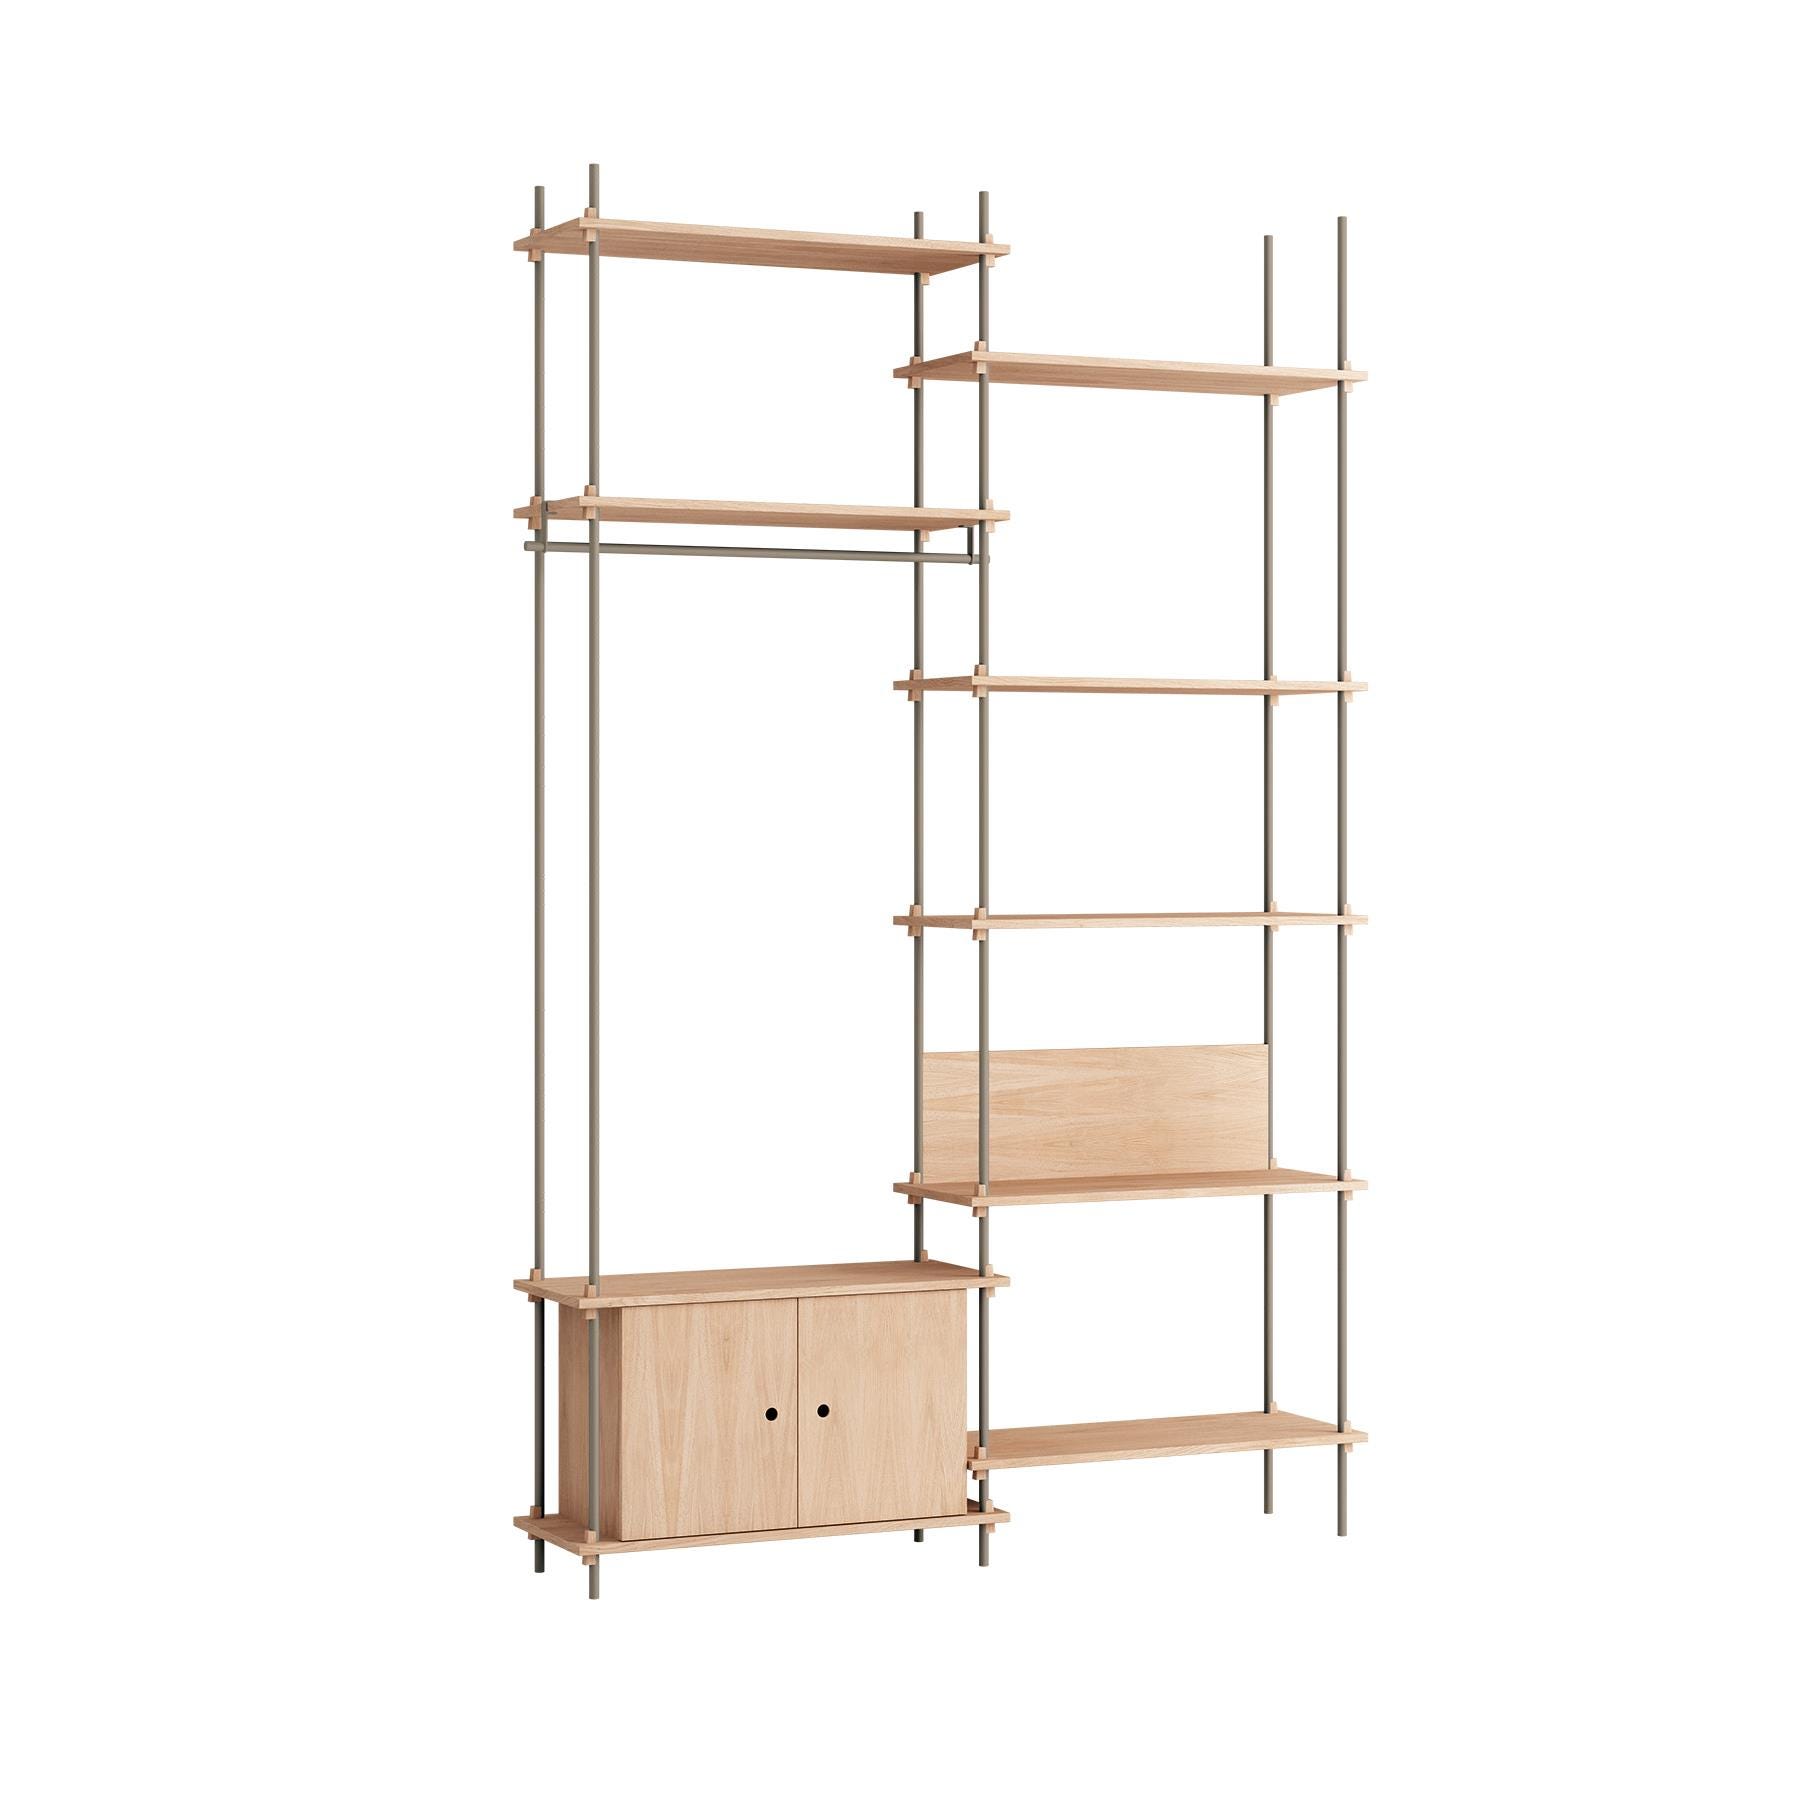 Moebe Double Shelving System 1 Cabinet Desk And Clothes Rail Oak Warm Grey Light Wood Designer Furniture From Holloways Of Ludlow